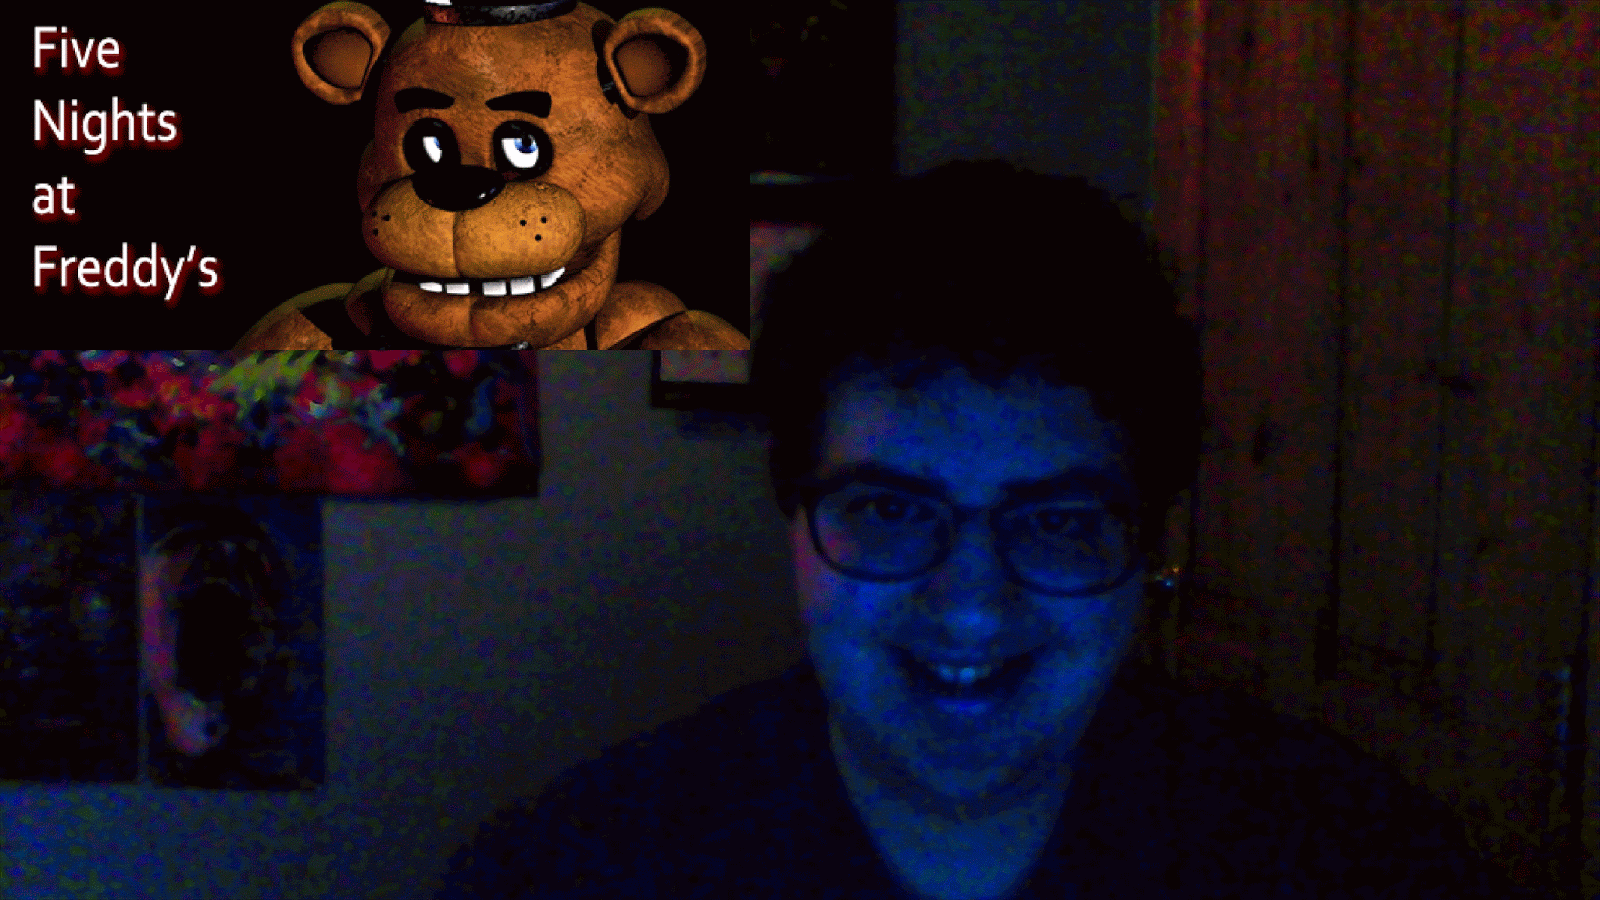 Planned All Along Five Nights At Freddys via plannedallalong.blogspot.com.